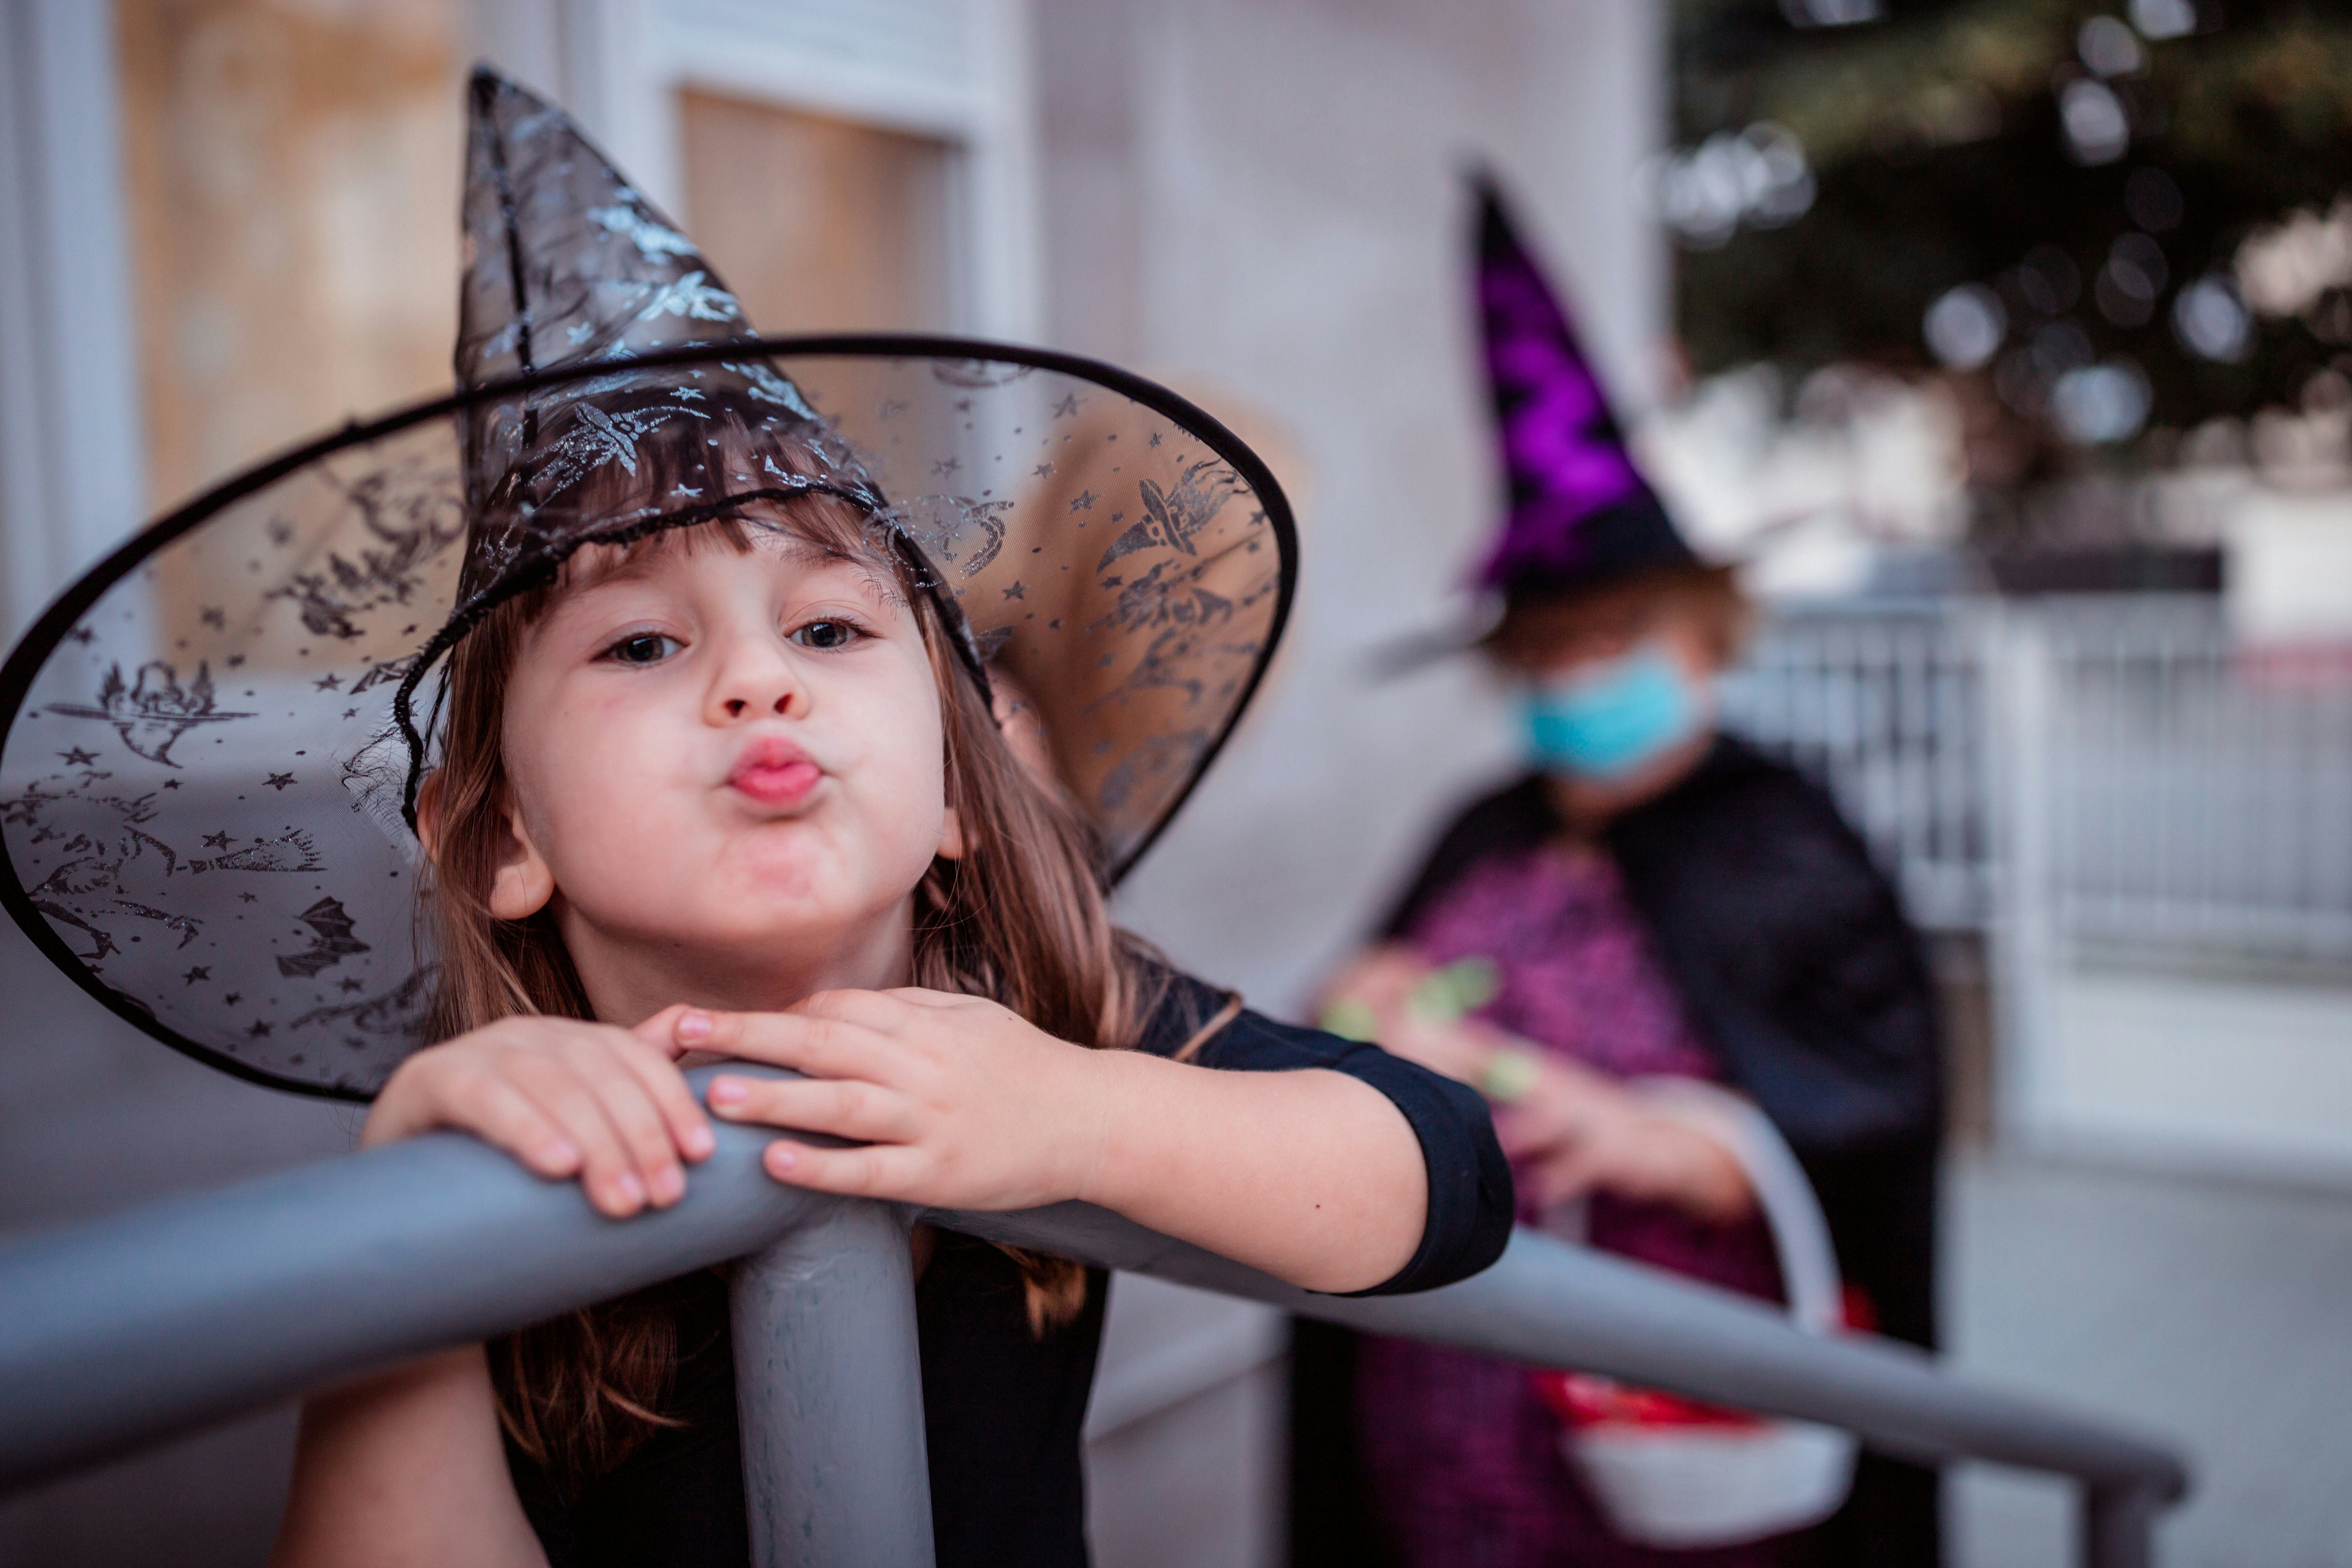 The Best Witch Halloween Costumes From Amazon, From Spooky To Silly image photo